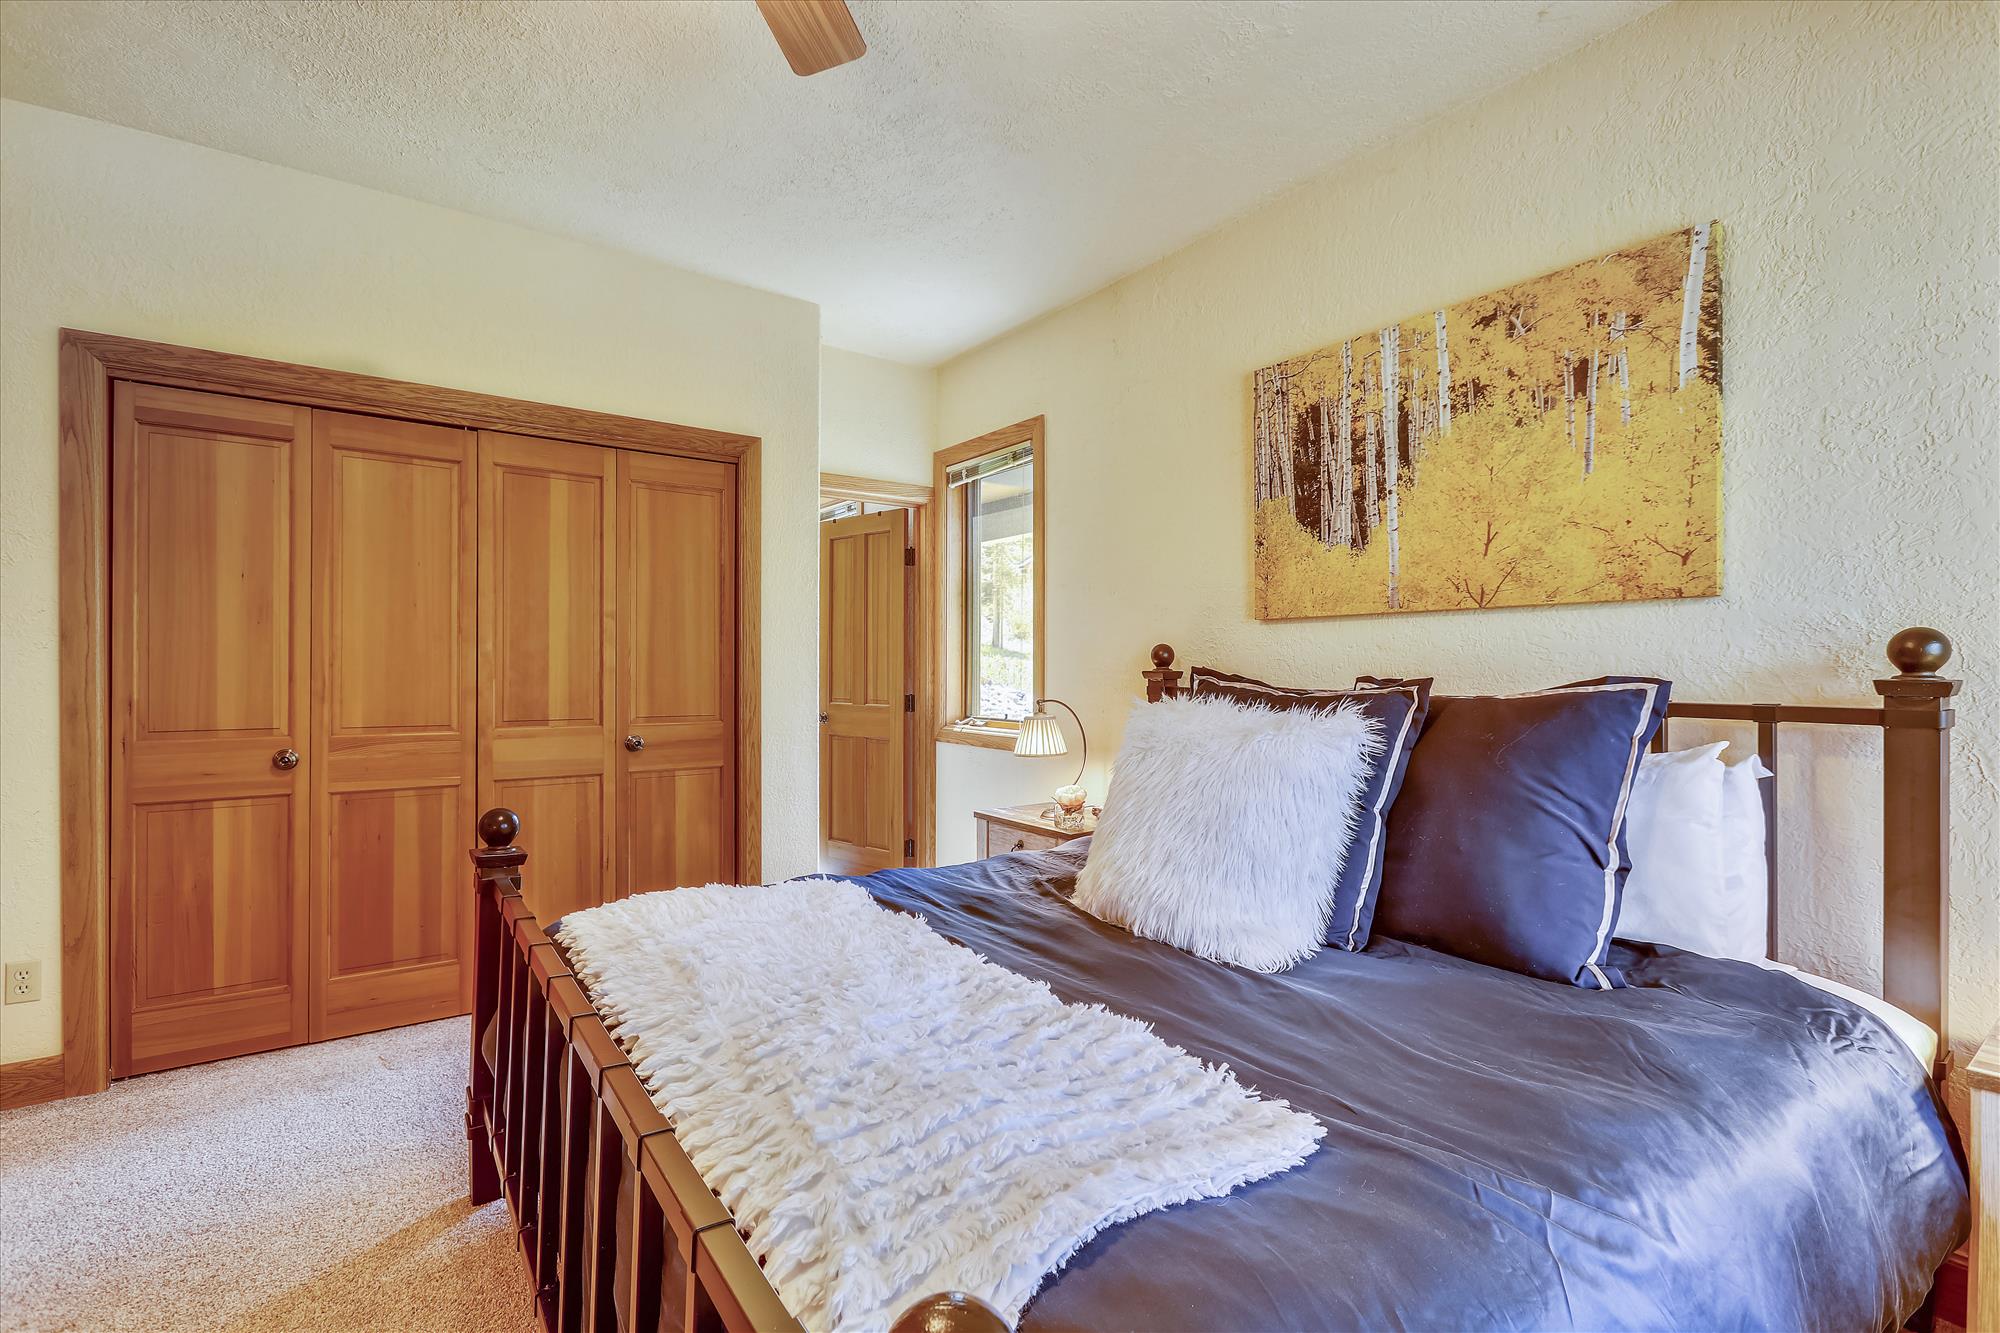 Additional king bedroom view with entryway to private bathroom and spacious closet - Evergreen Lodge Breckenridge Vacation Rental